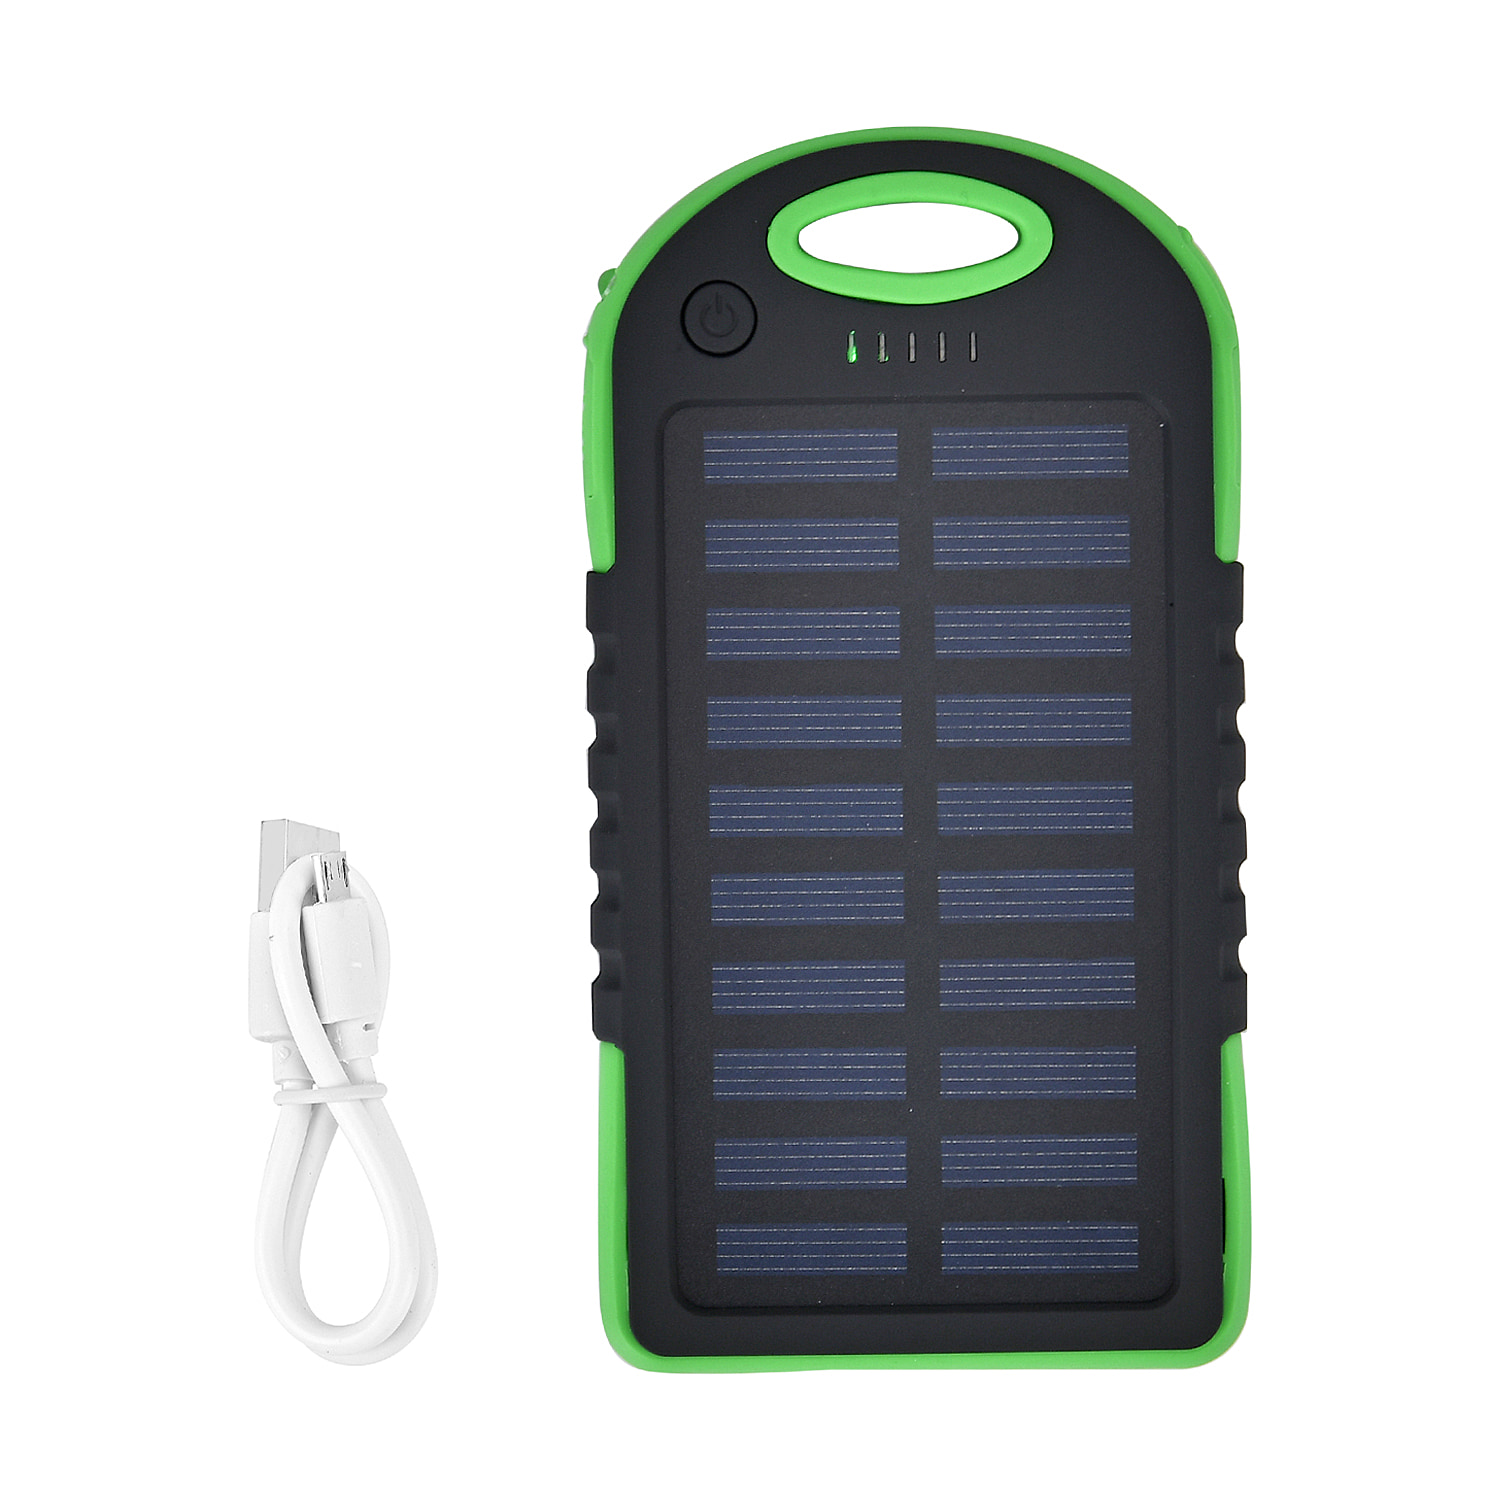 5000mAh Power Bank with Solar Panel, USB Cable (Change Android into Type C) - Green & Black